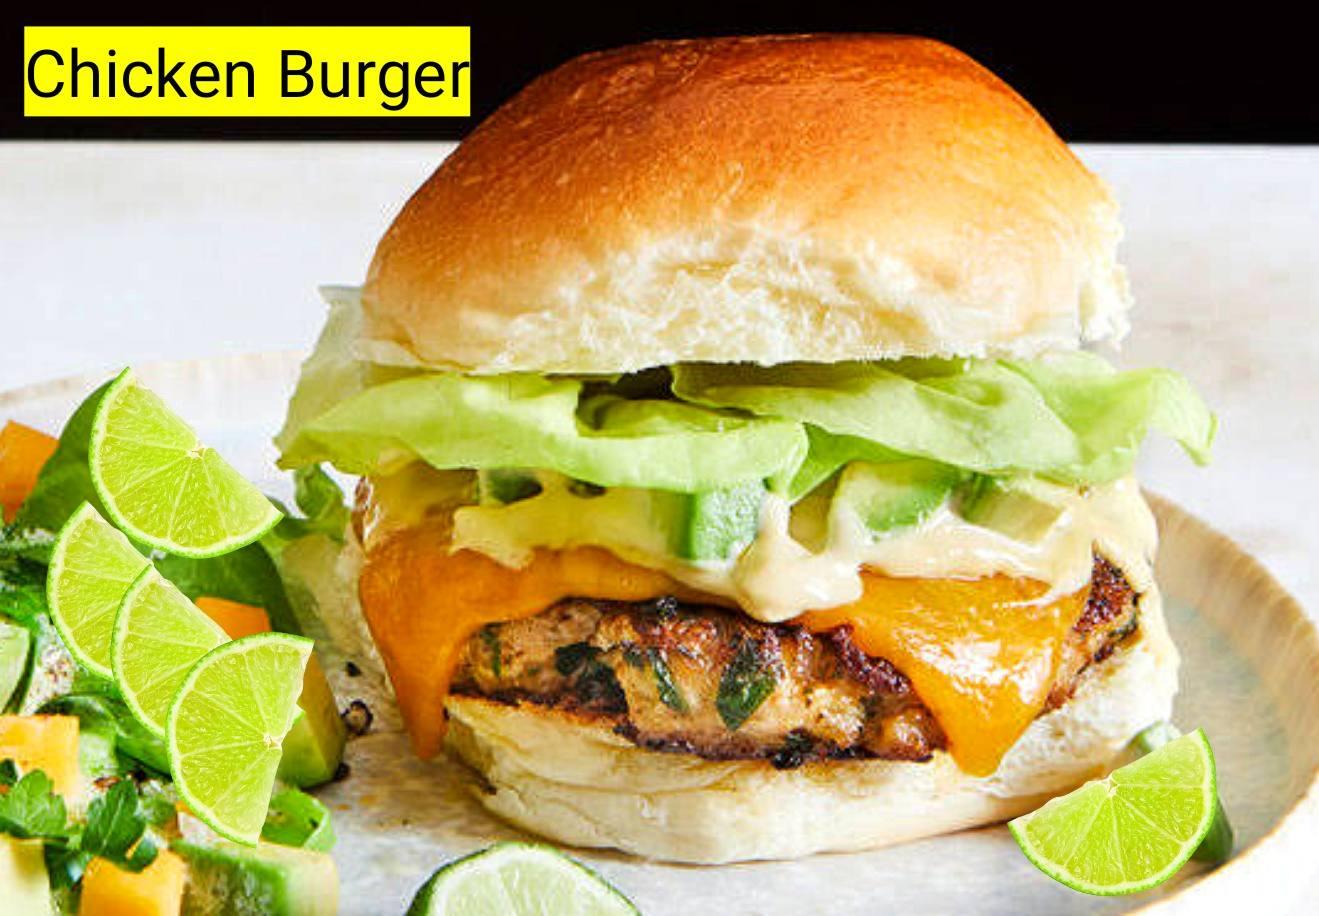 Chicken Burger is What To Eat For Lunch At Home